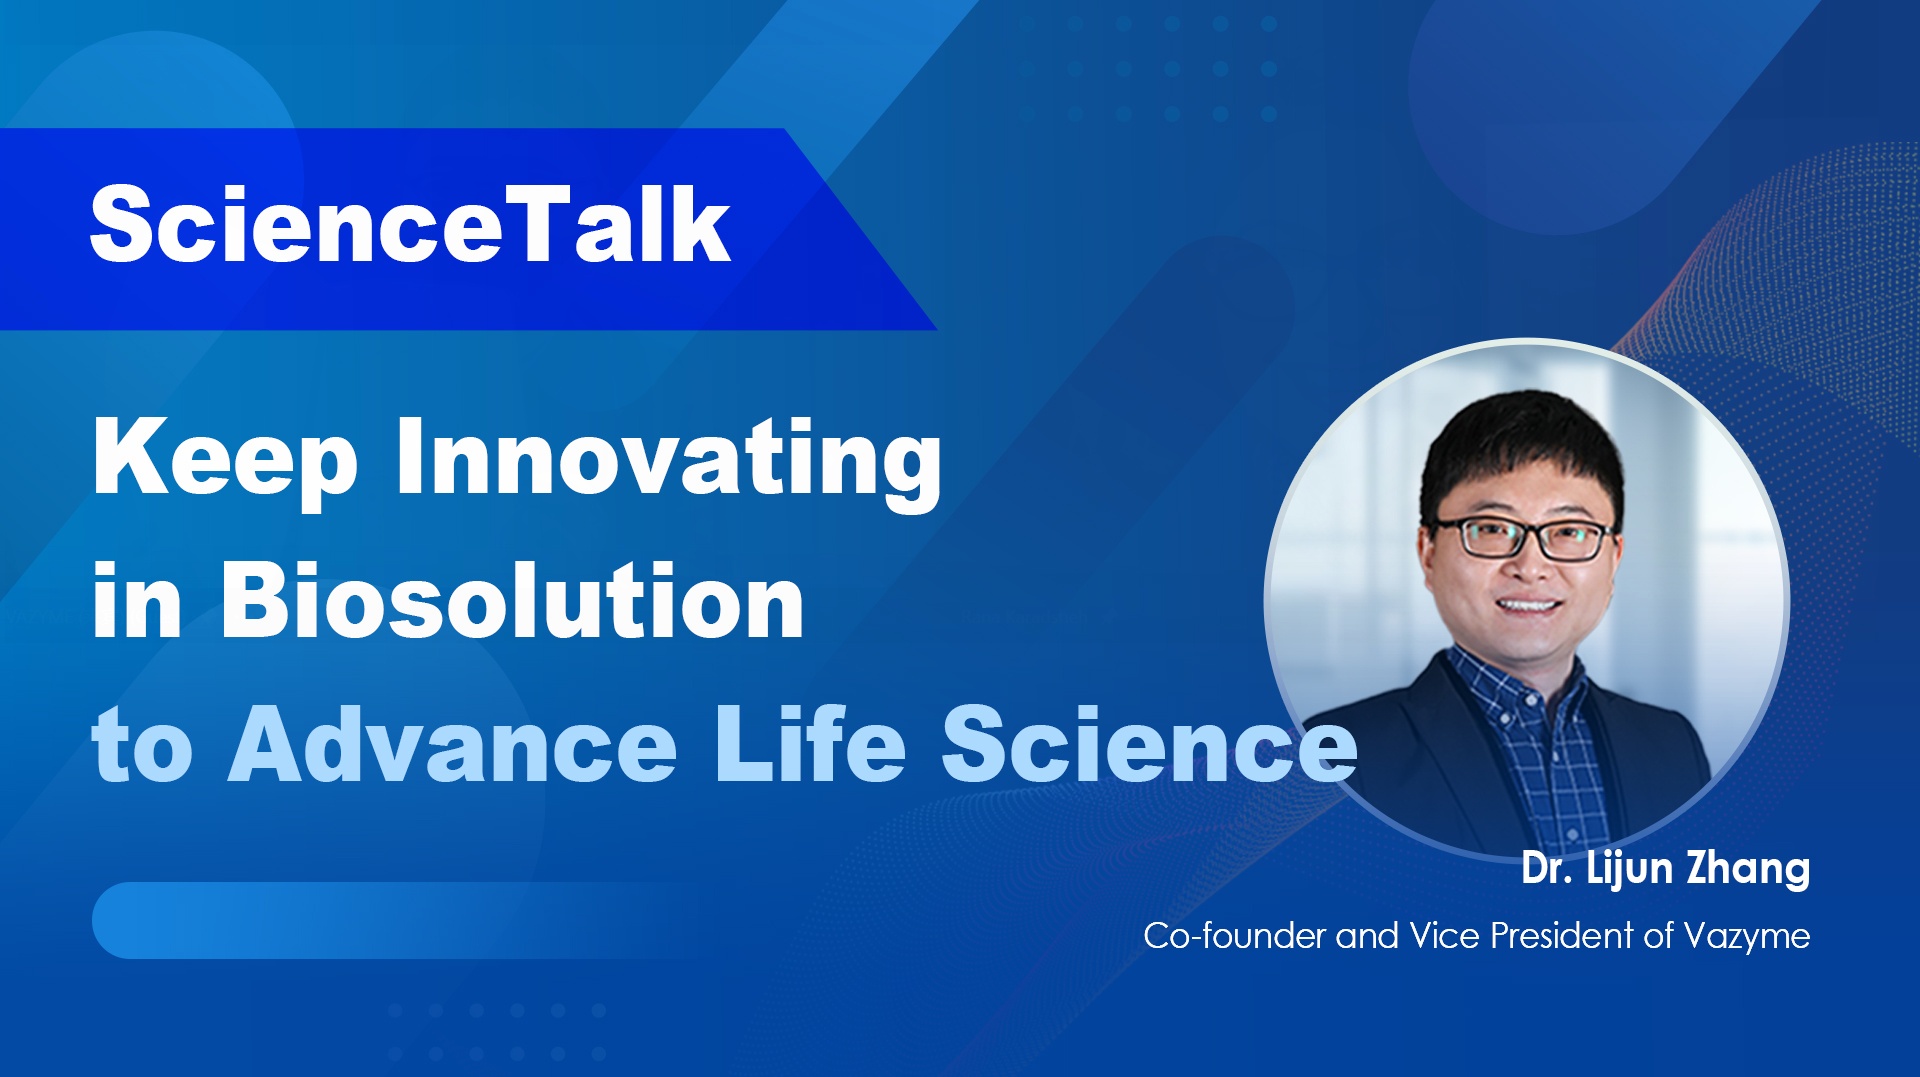 Keep Innovating in Biosolution to Advance Life Science